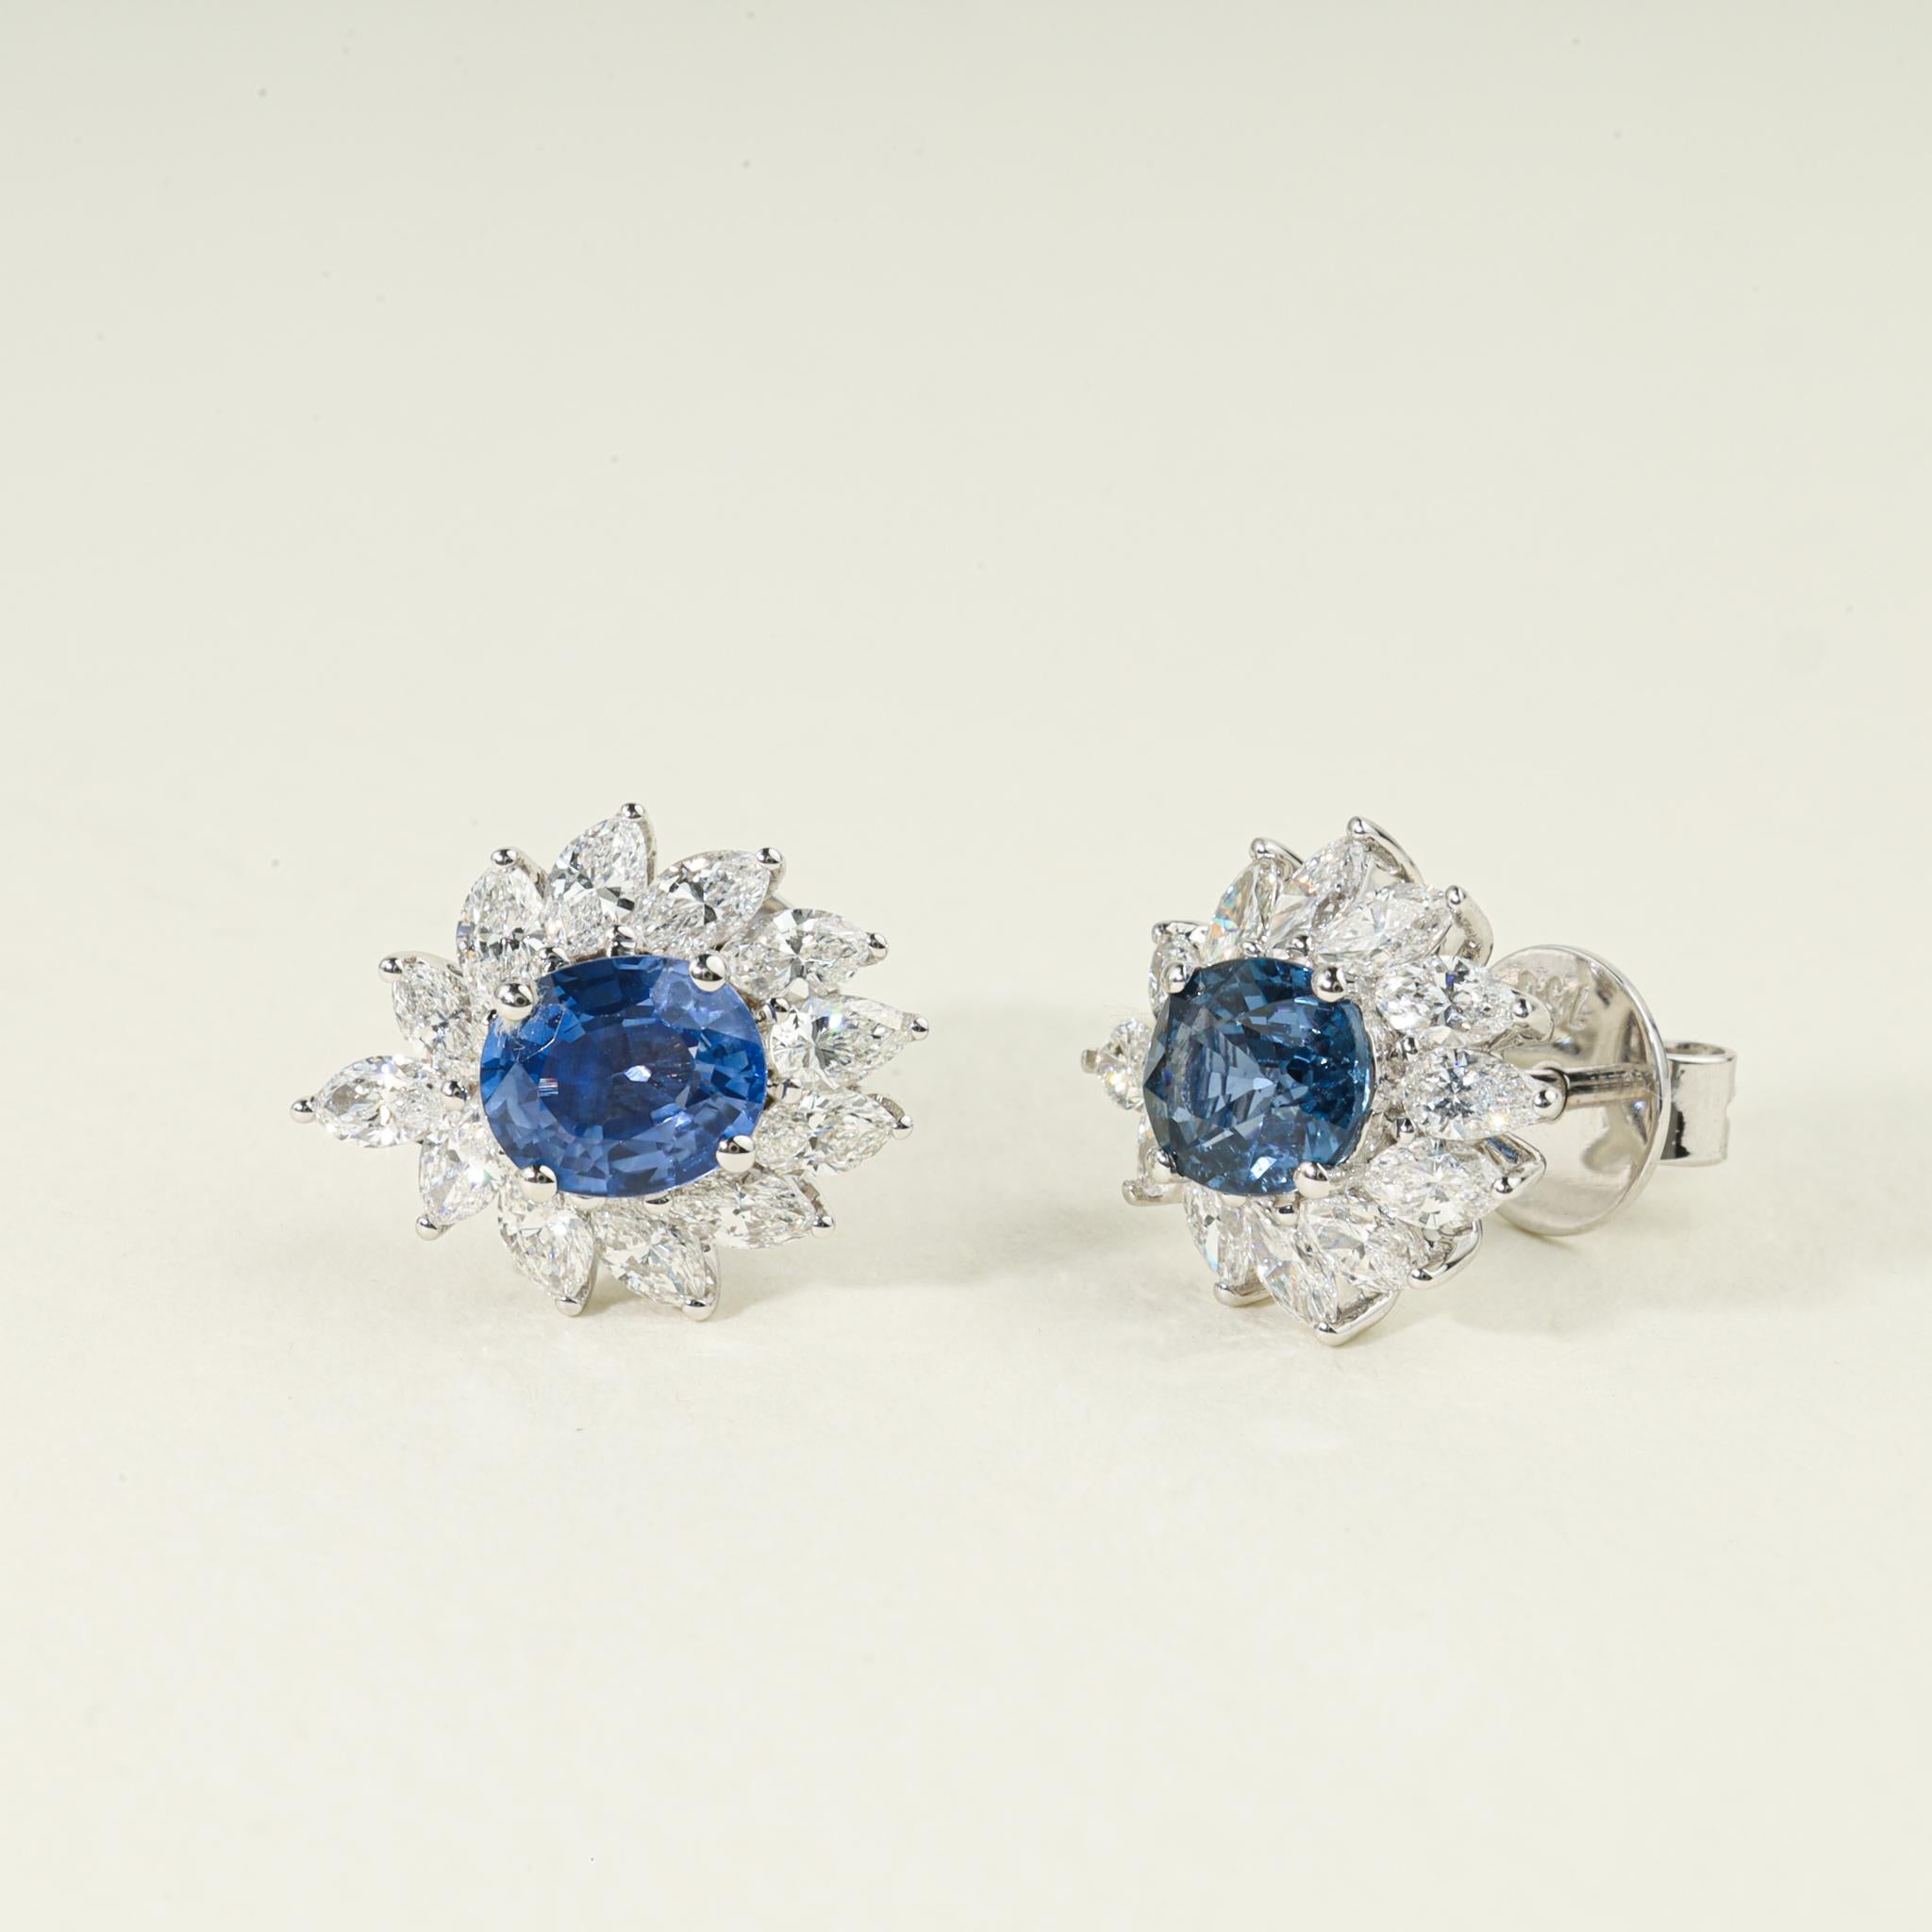 Art Deco Certified Sapphire Diamond Halo Oval Cut Stud Earrings for her, 18k white gold For Sale